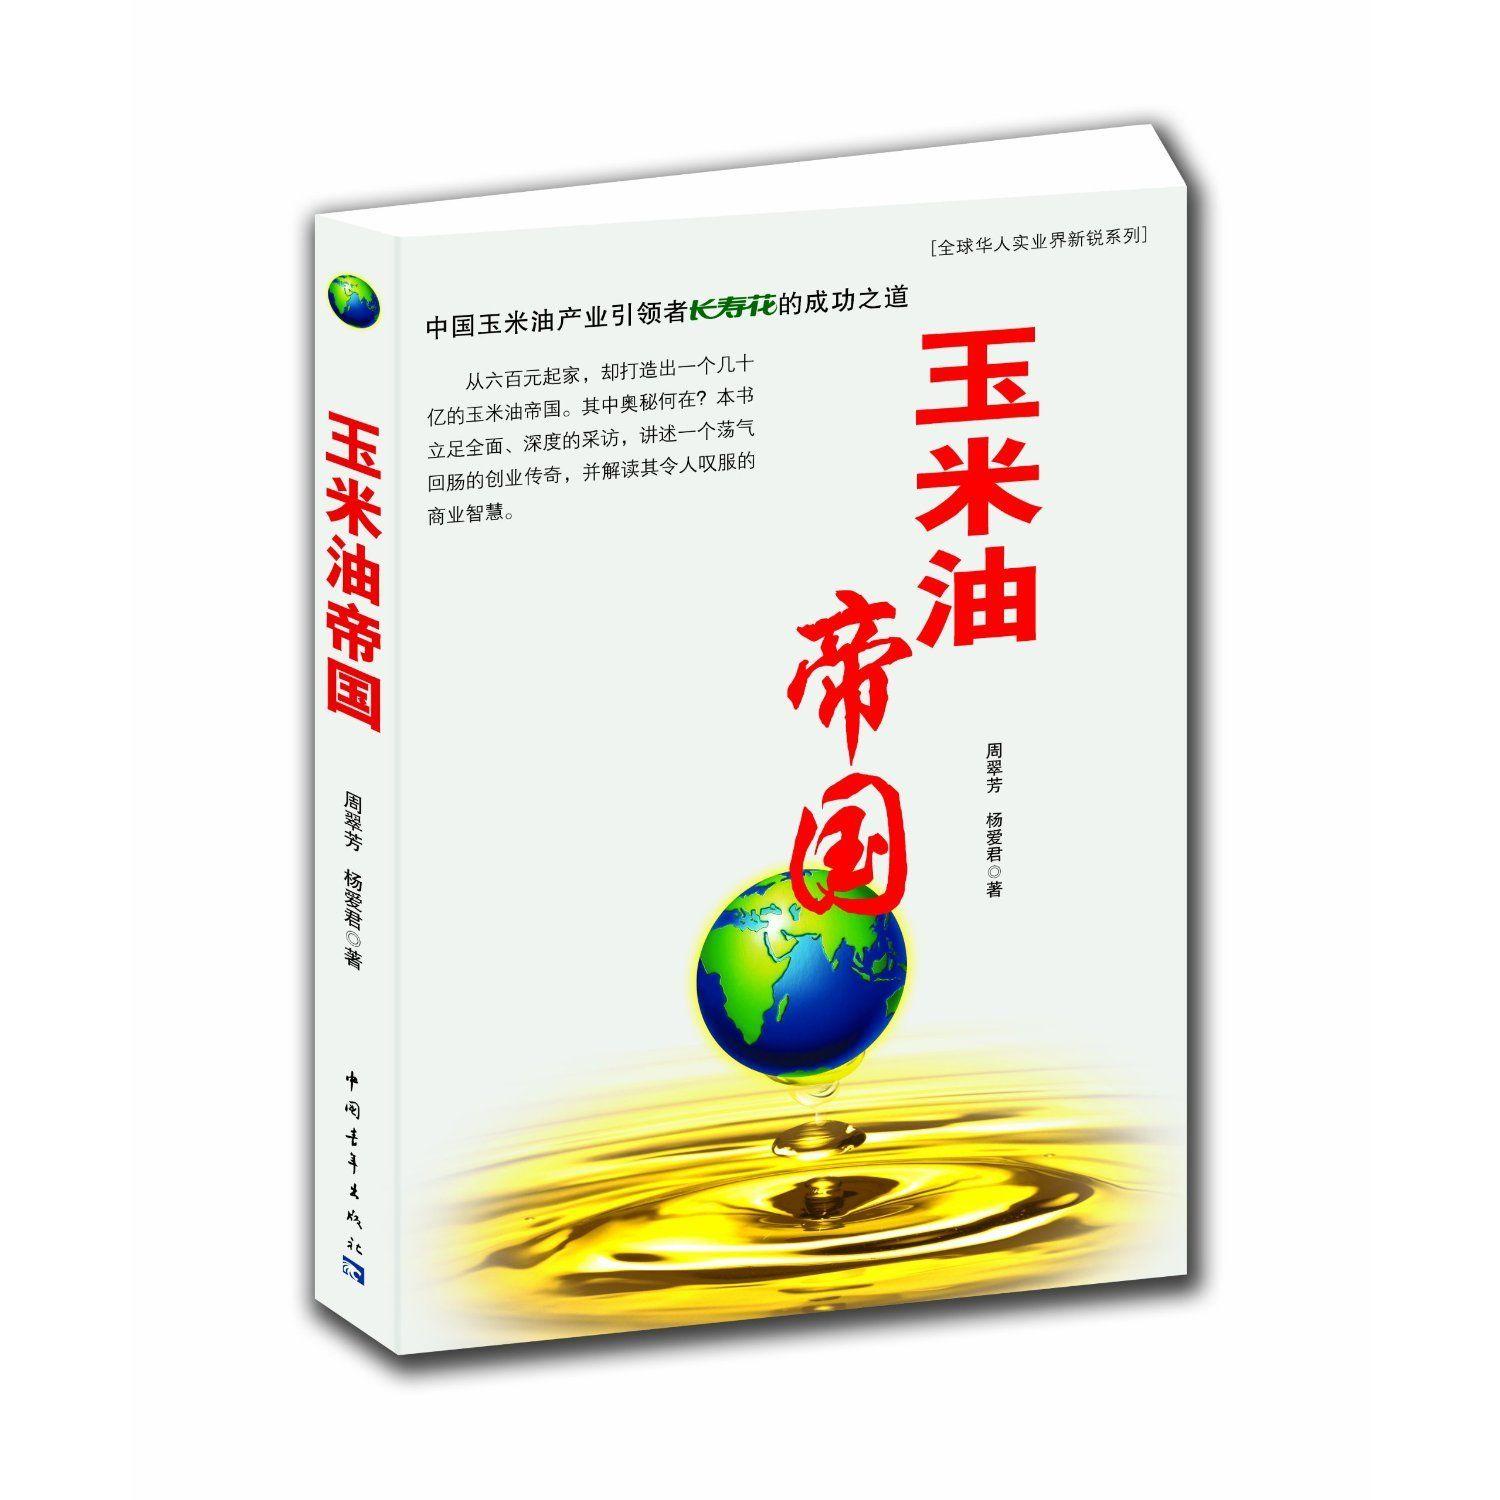 Chinese Oil Company Logo - Empire of Corn Oil (Chinese Edition): Zhou Cuifang: 9787515309934 ...